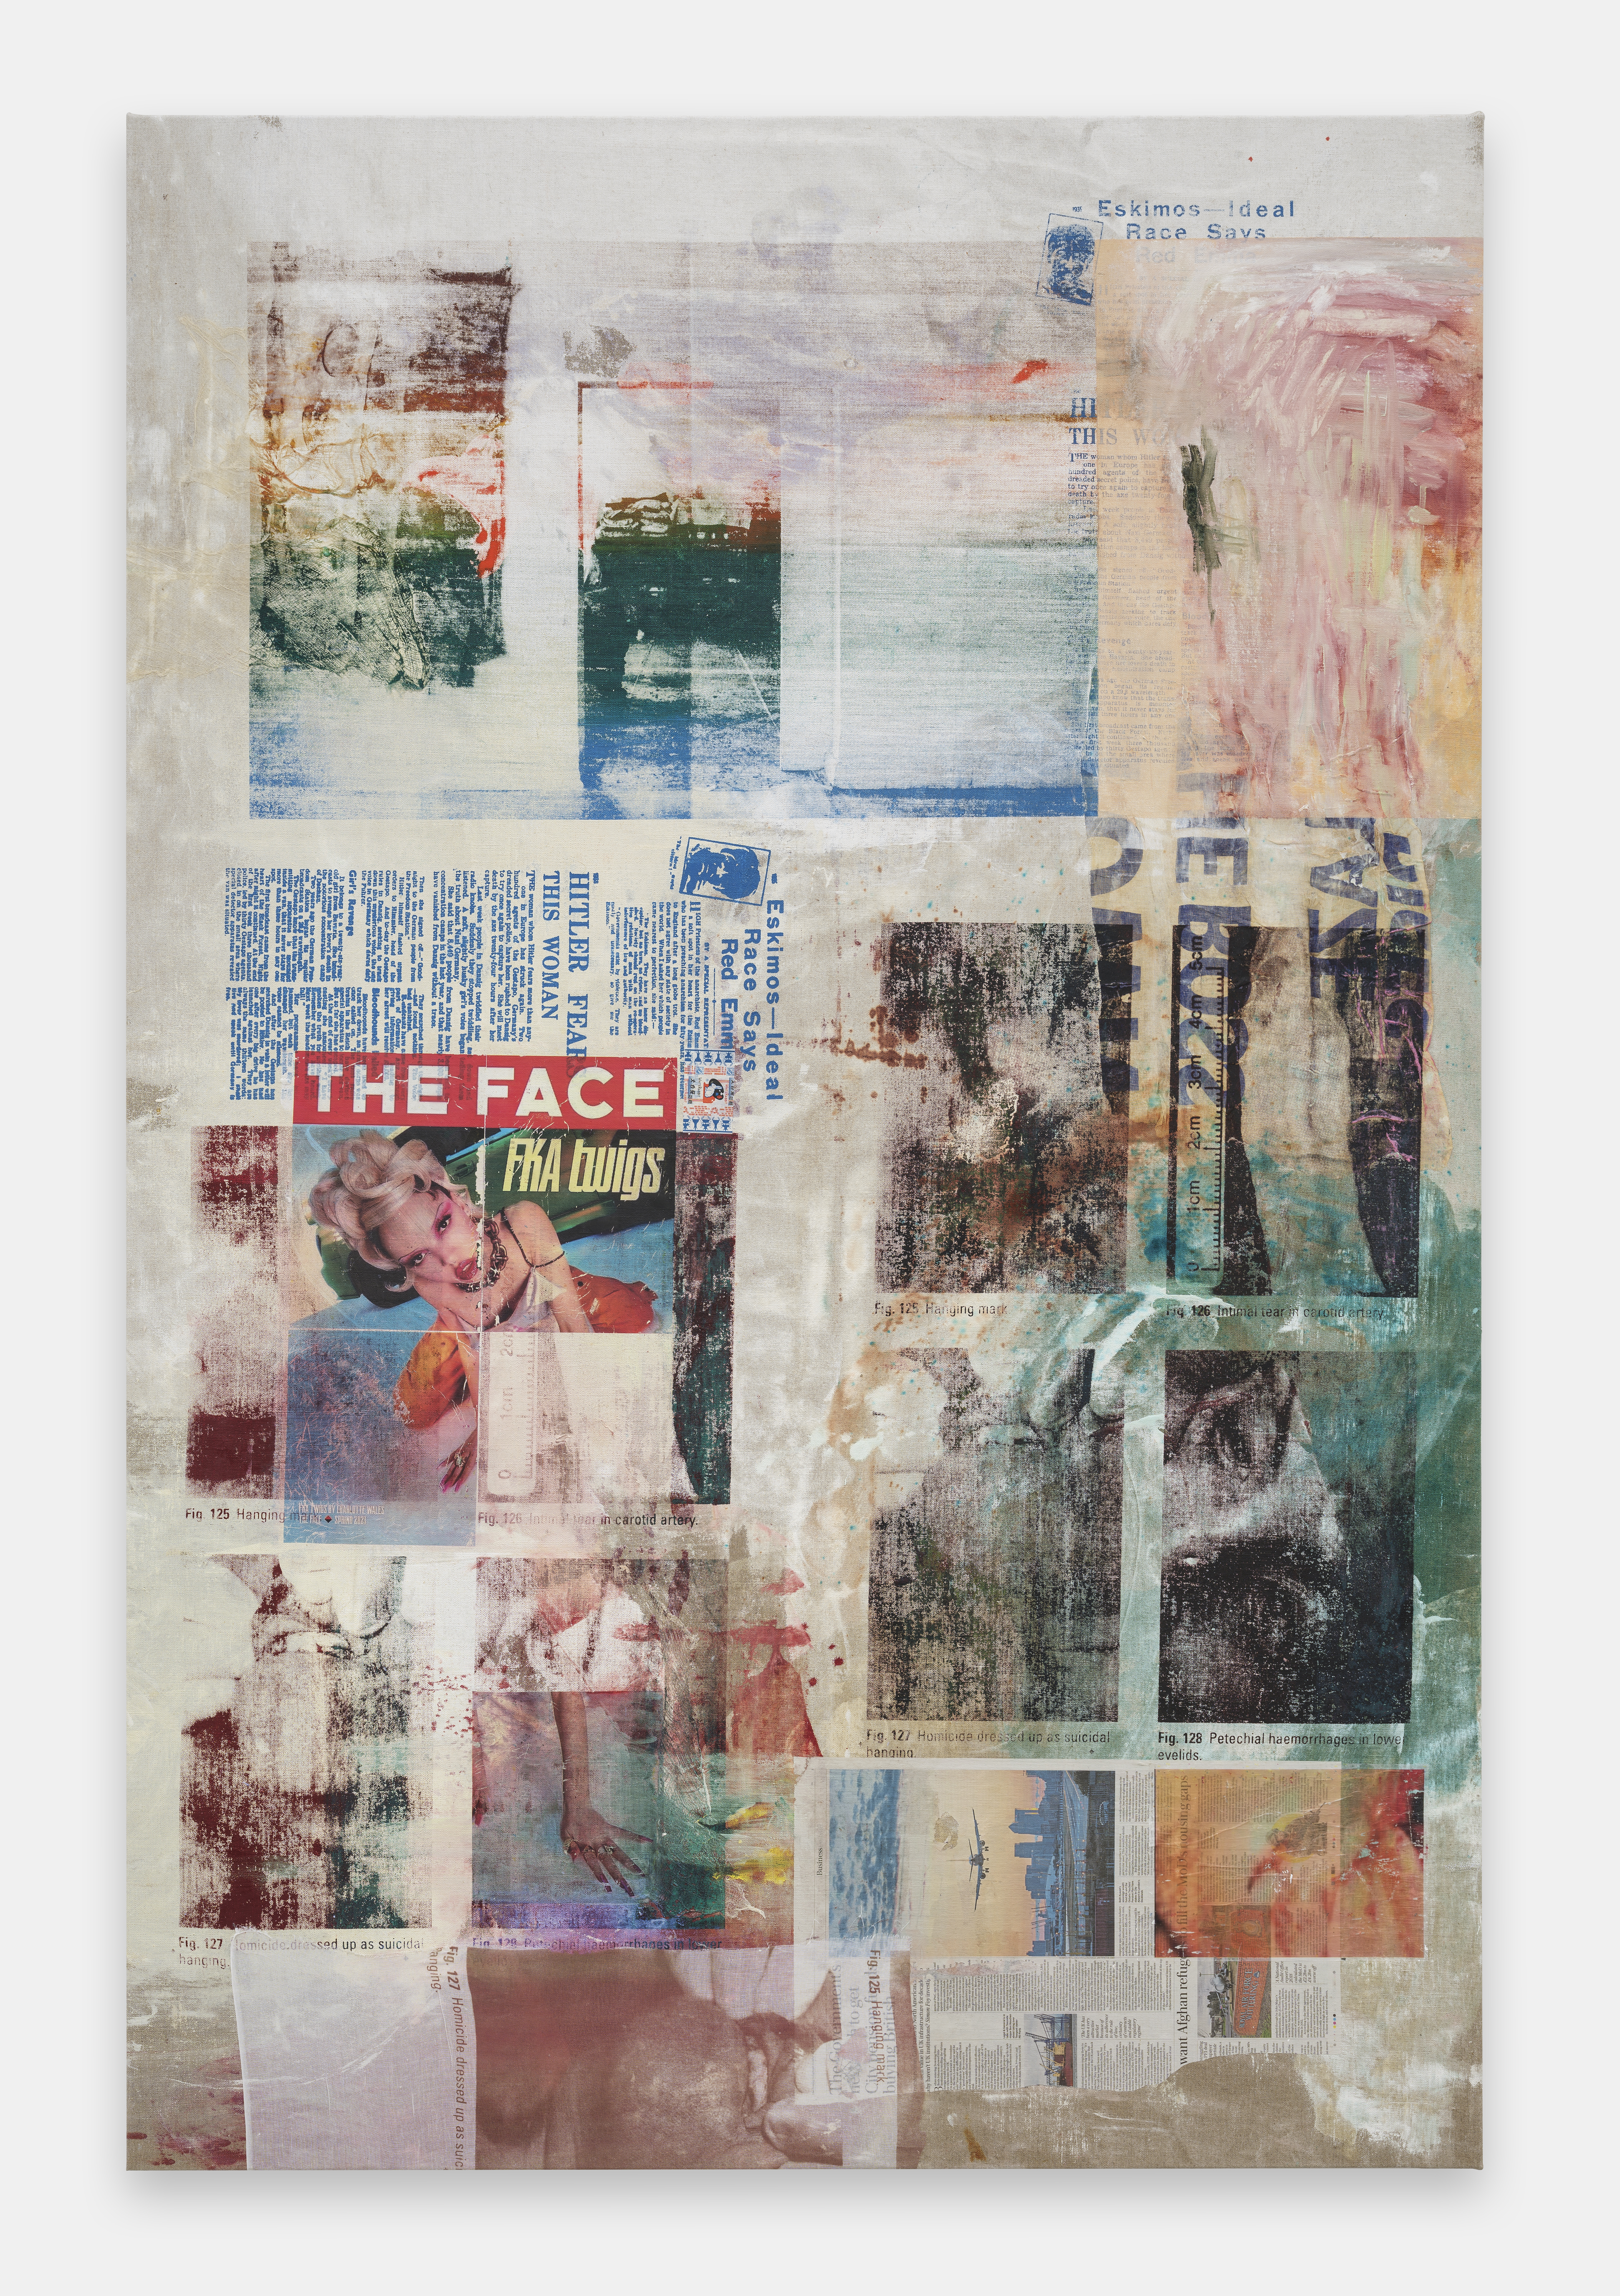 Mandy El-Sayegh, The Face, 2021, Silkscreened oil and acrylic on linen with collaged